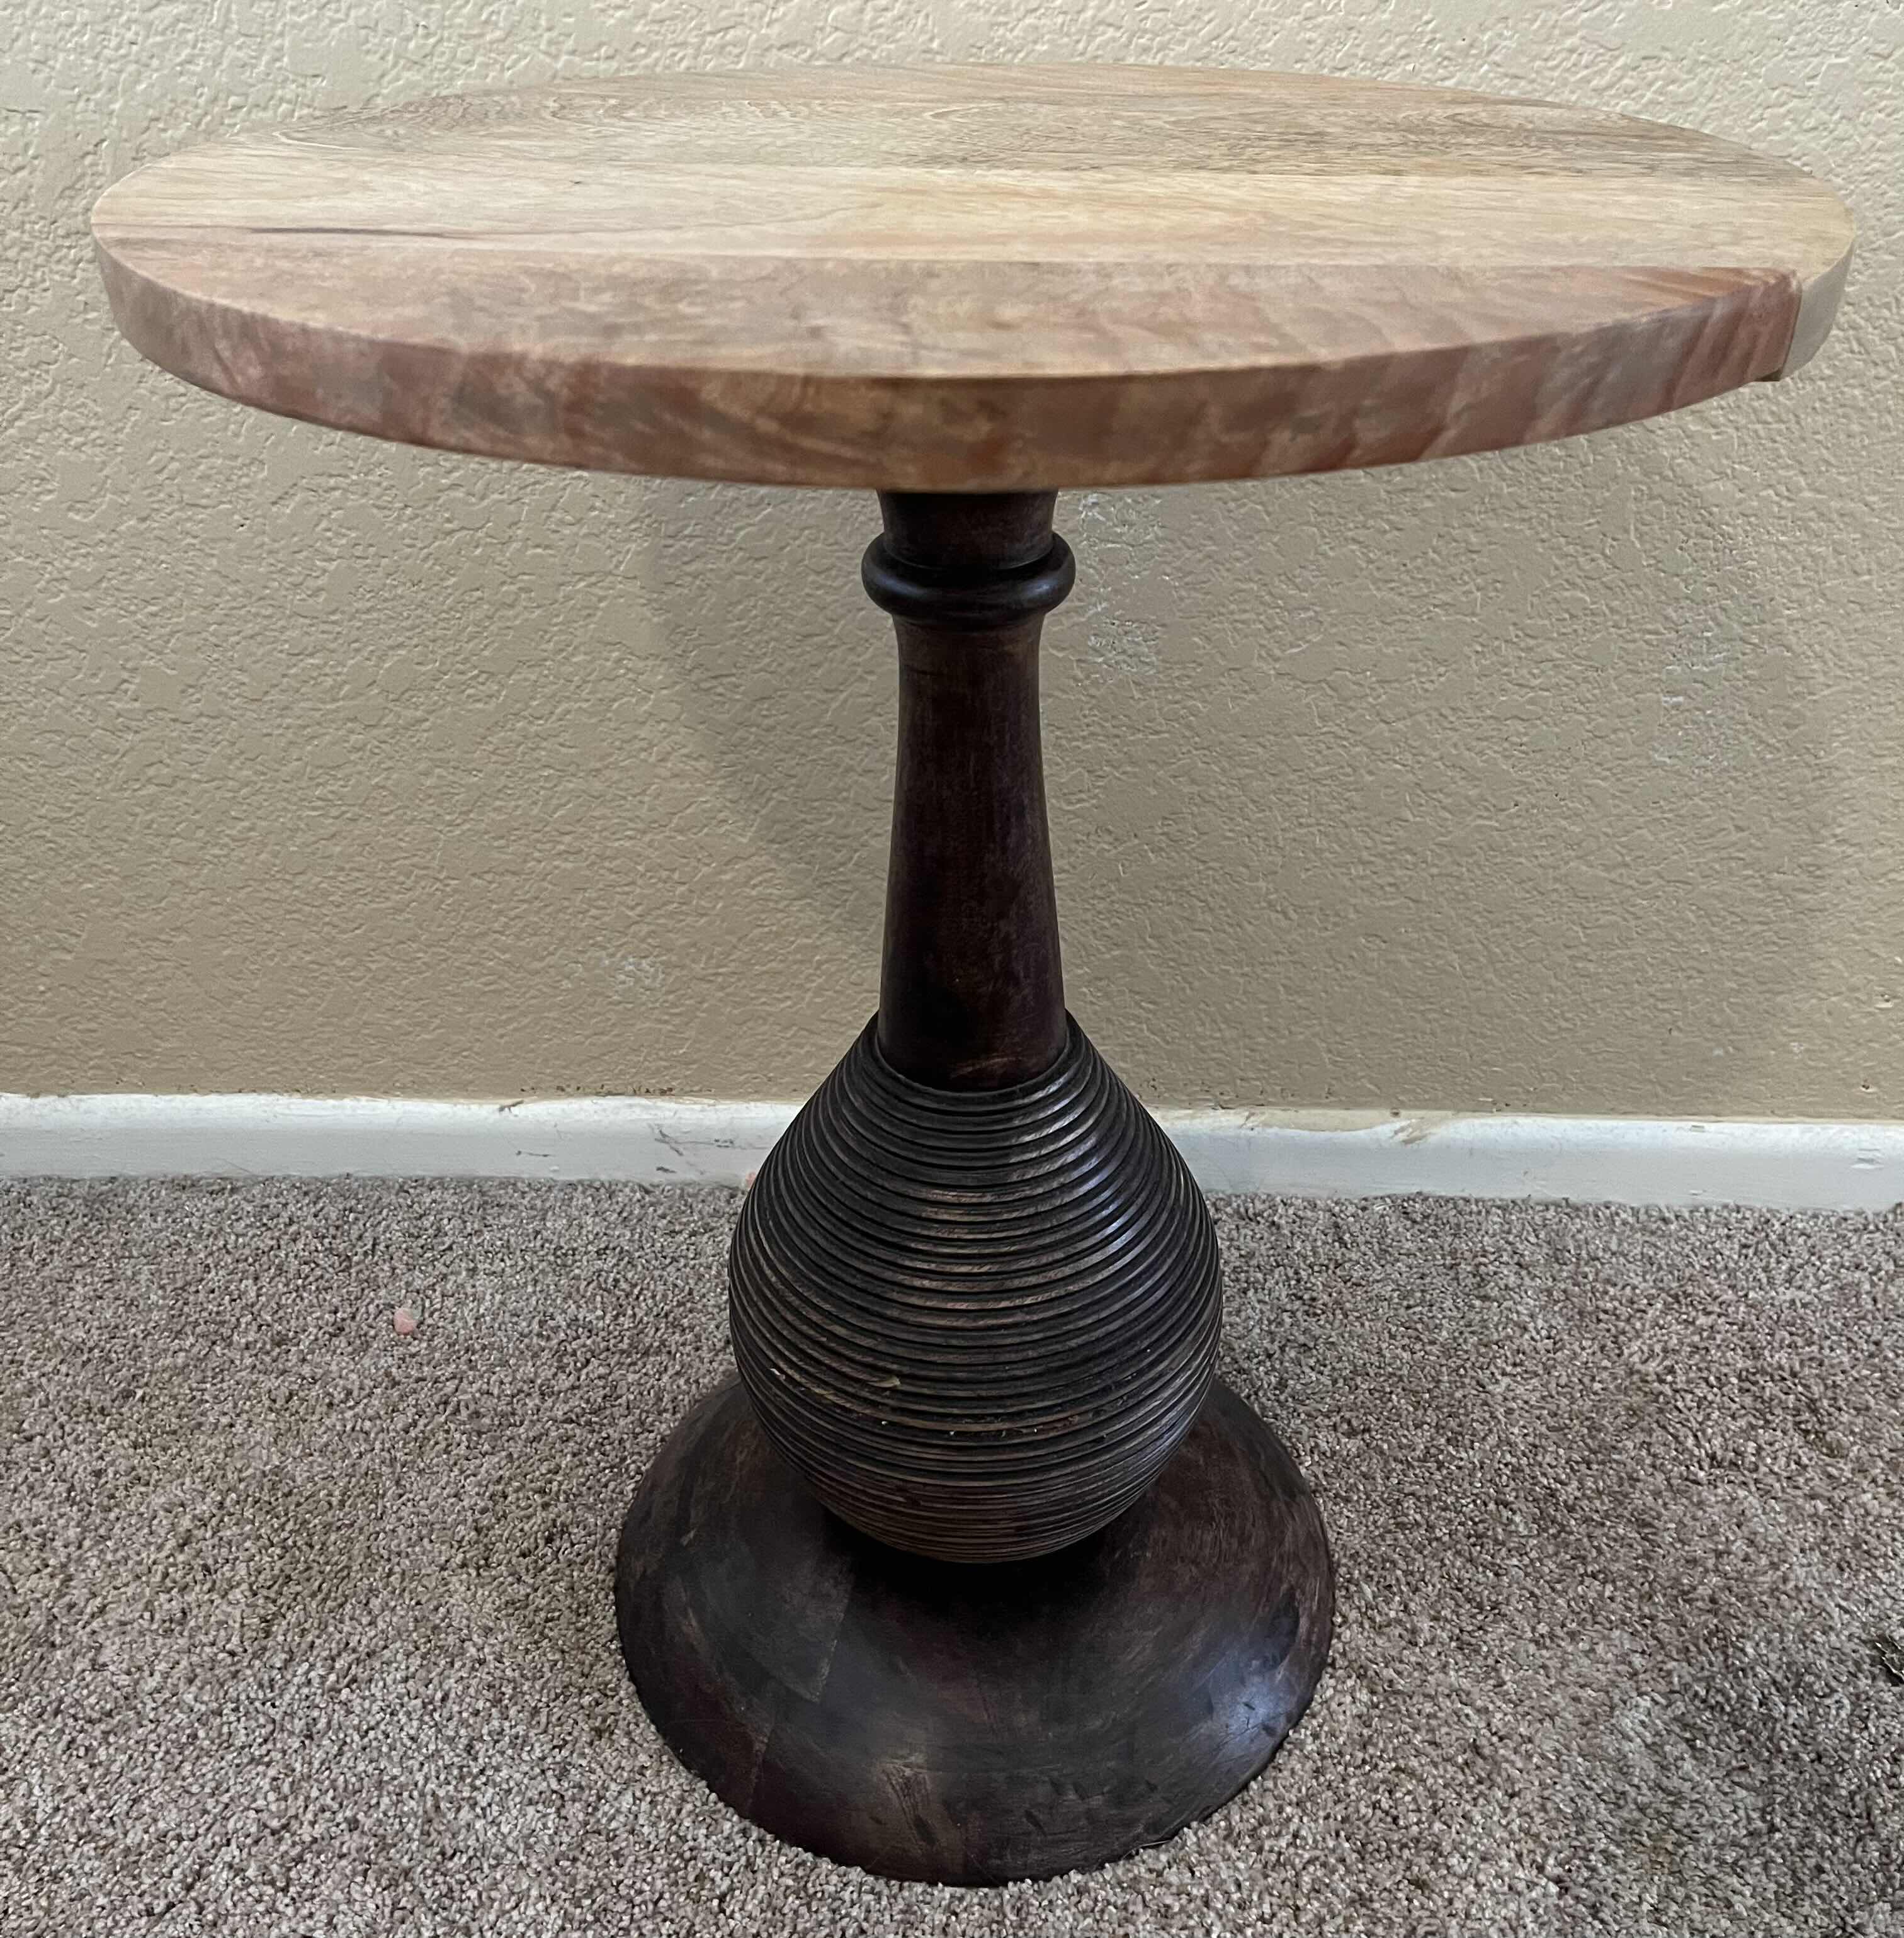 Photo 1 of HUNTER CARVED WOOD PEDESTAL BASE ROUND ACCENT SIDE TABLE 17.75” X 22”